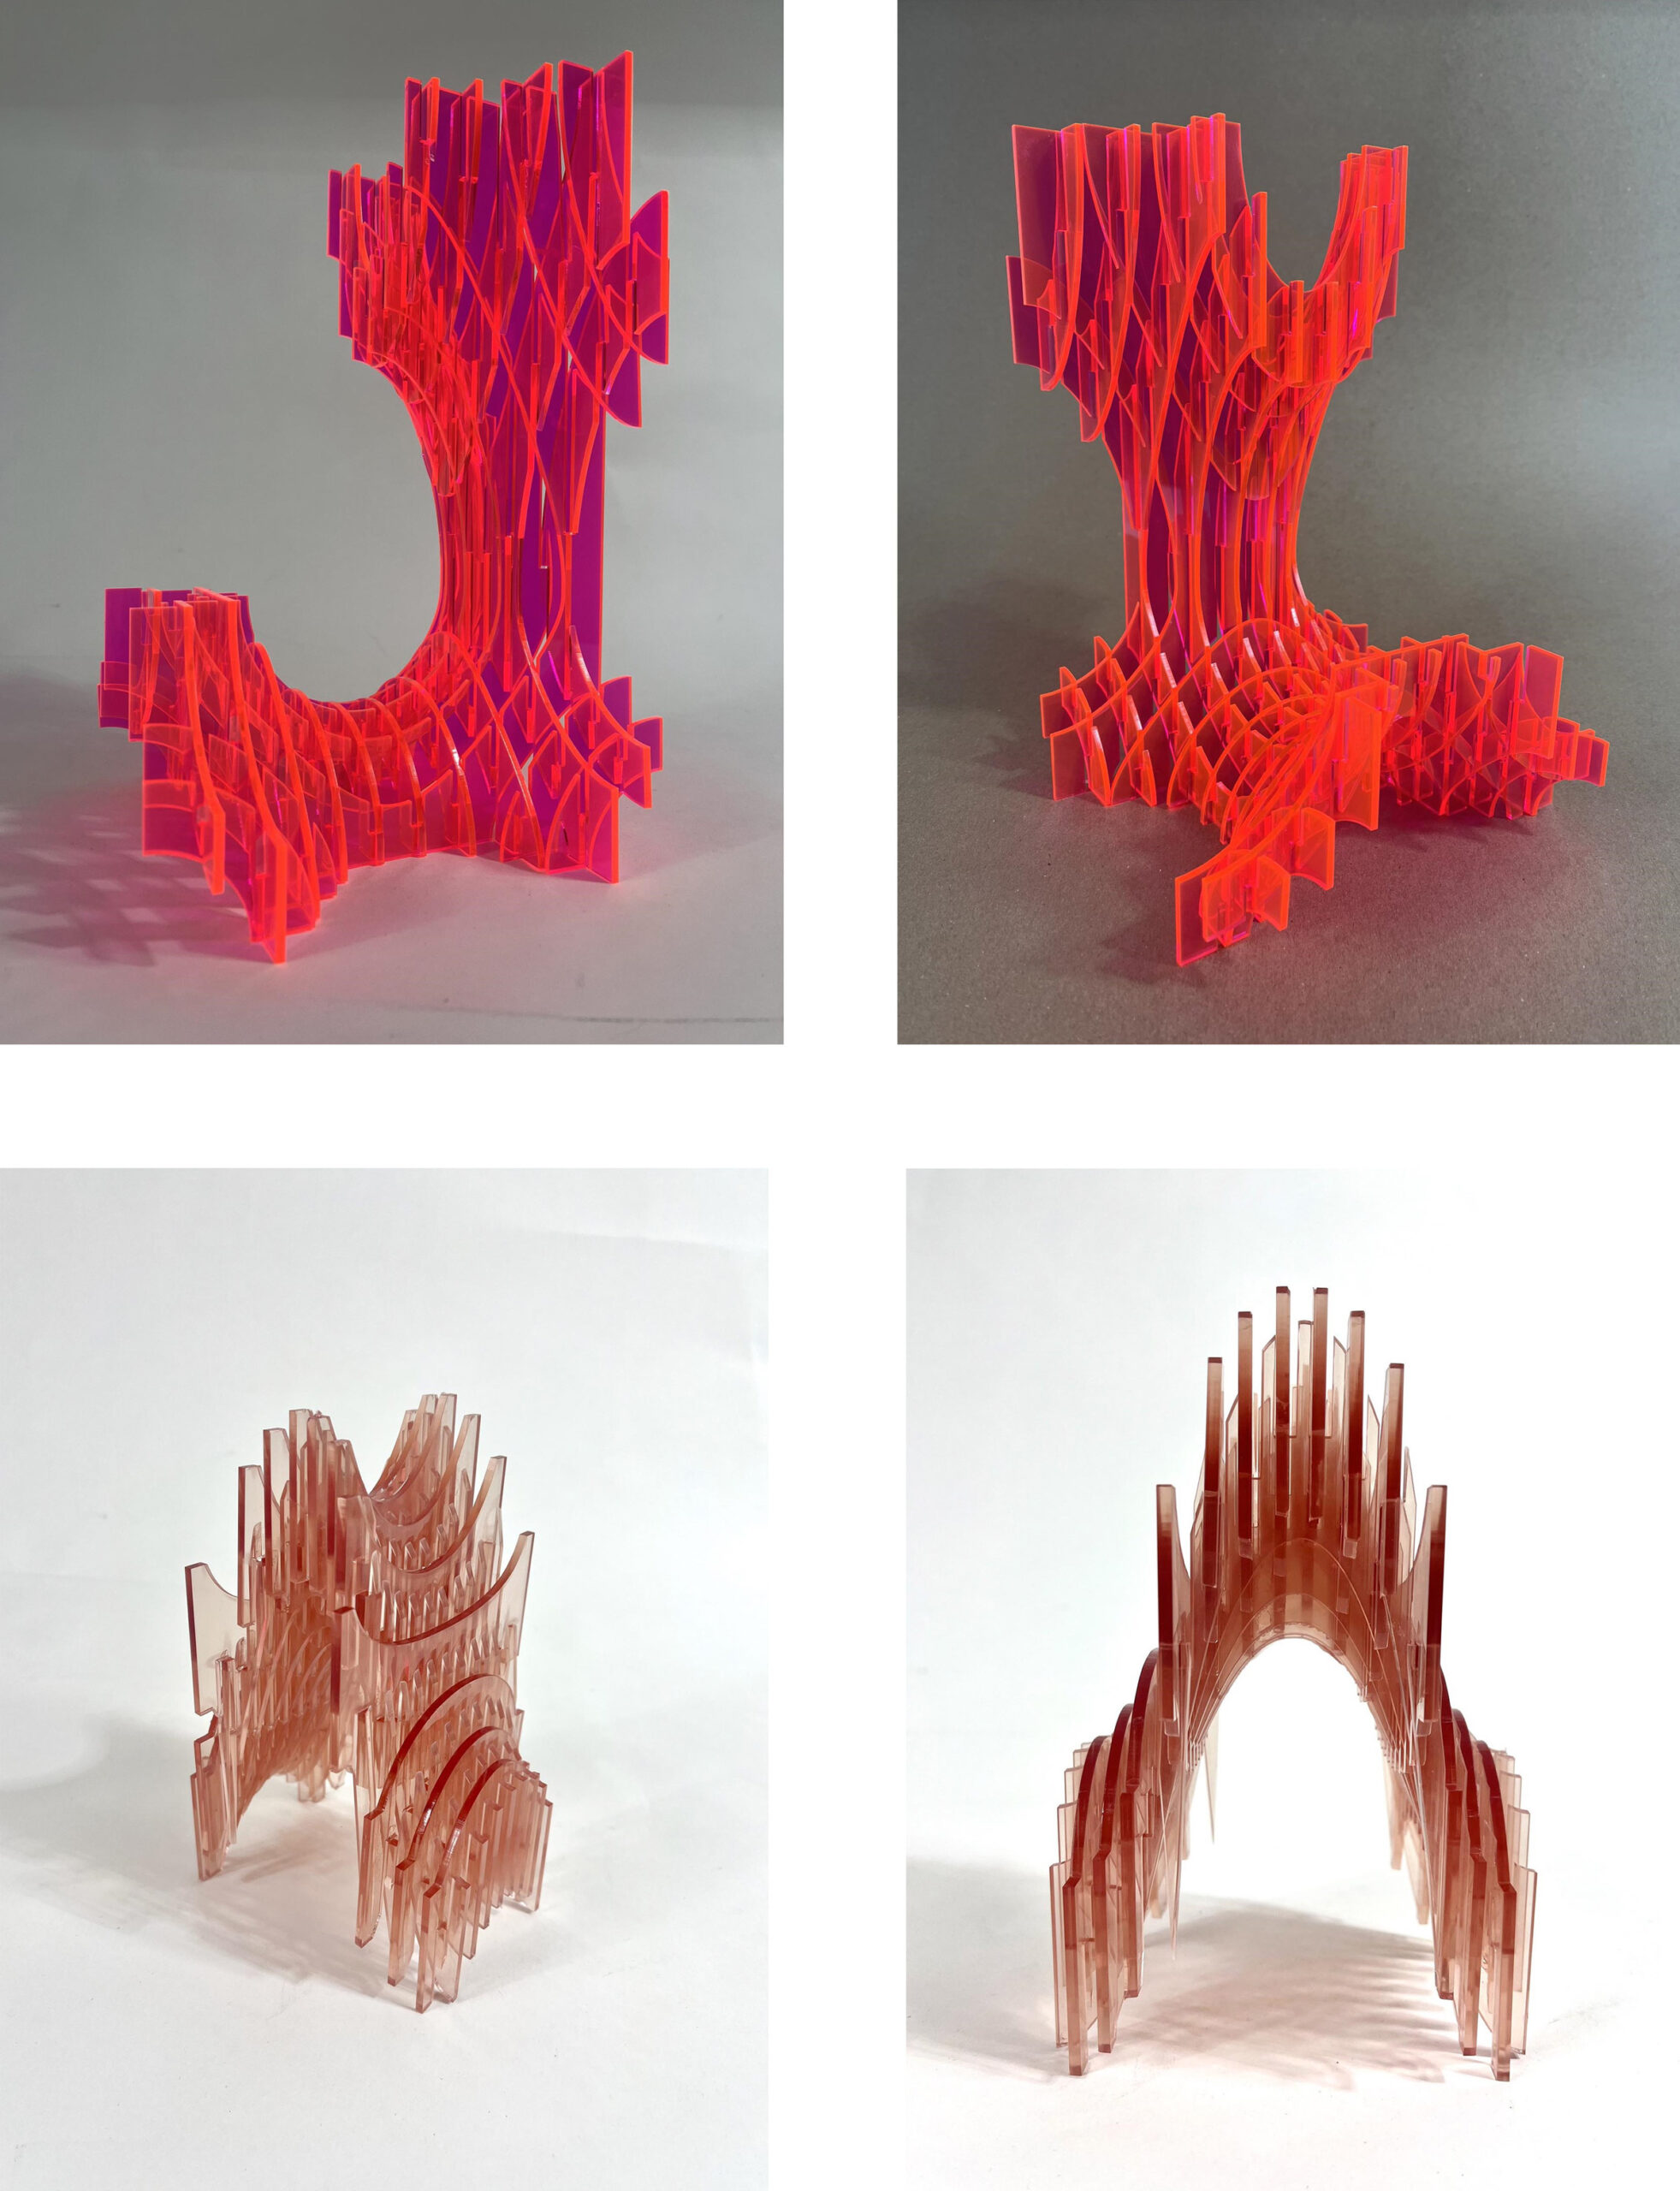 Two sets of two images of two different models. The top set is a bright, translucent red plastic looking object. It is L shaped. The second model is a translucent rose colored arch also made of connected pieces of plastic.